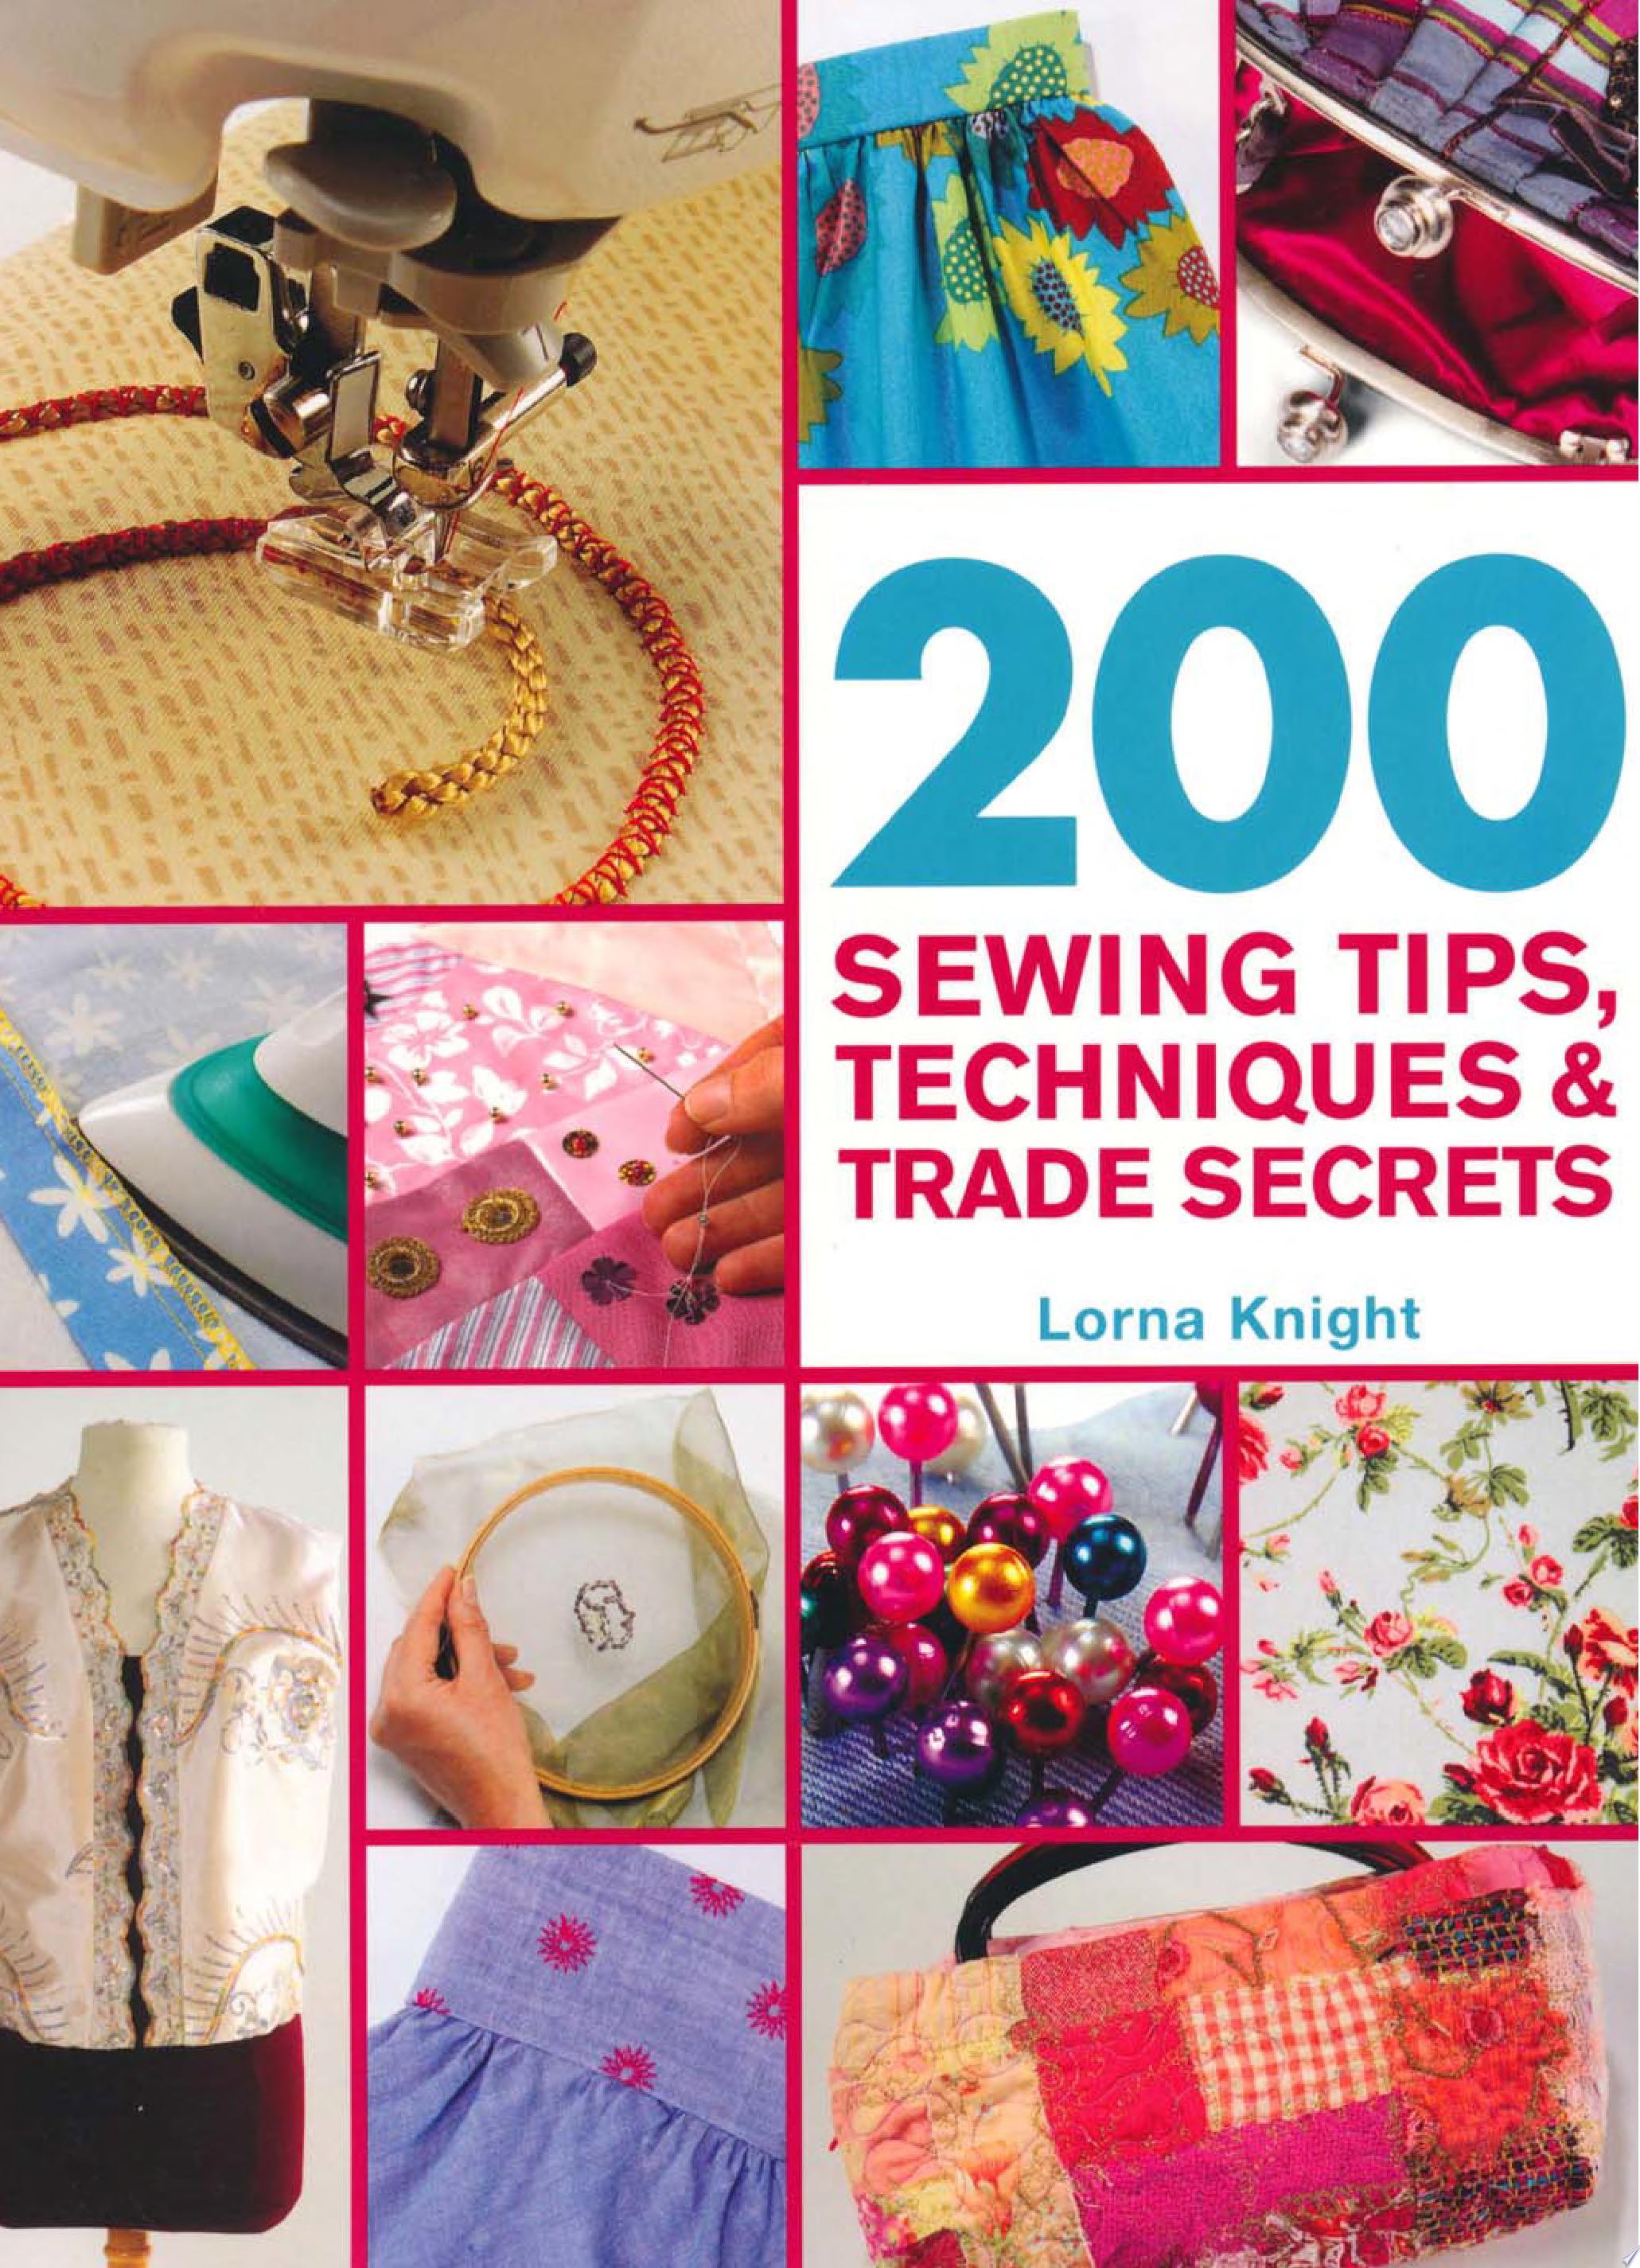 Image for "200 Sewing Tips, Techniques &amp; Trade Secrets"